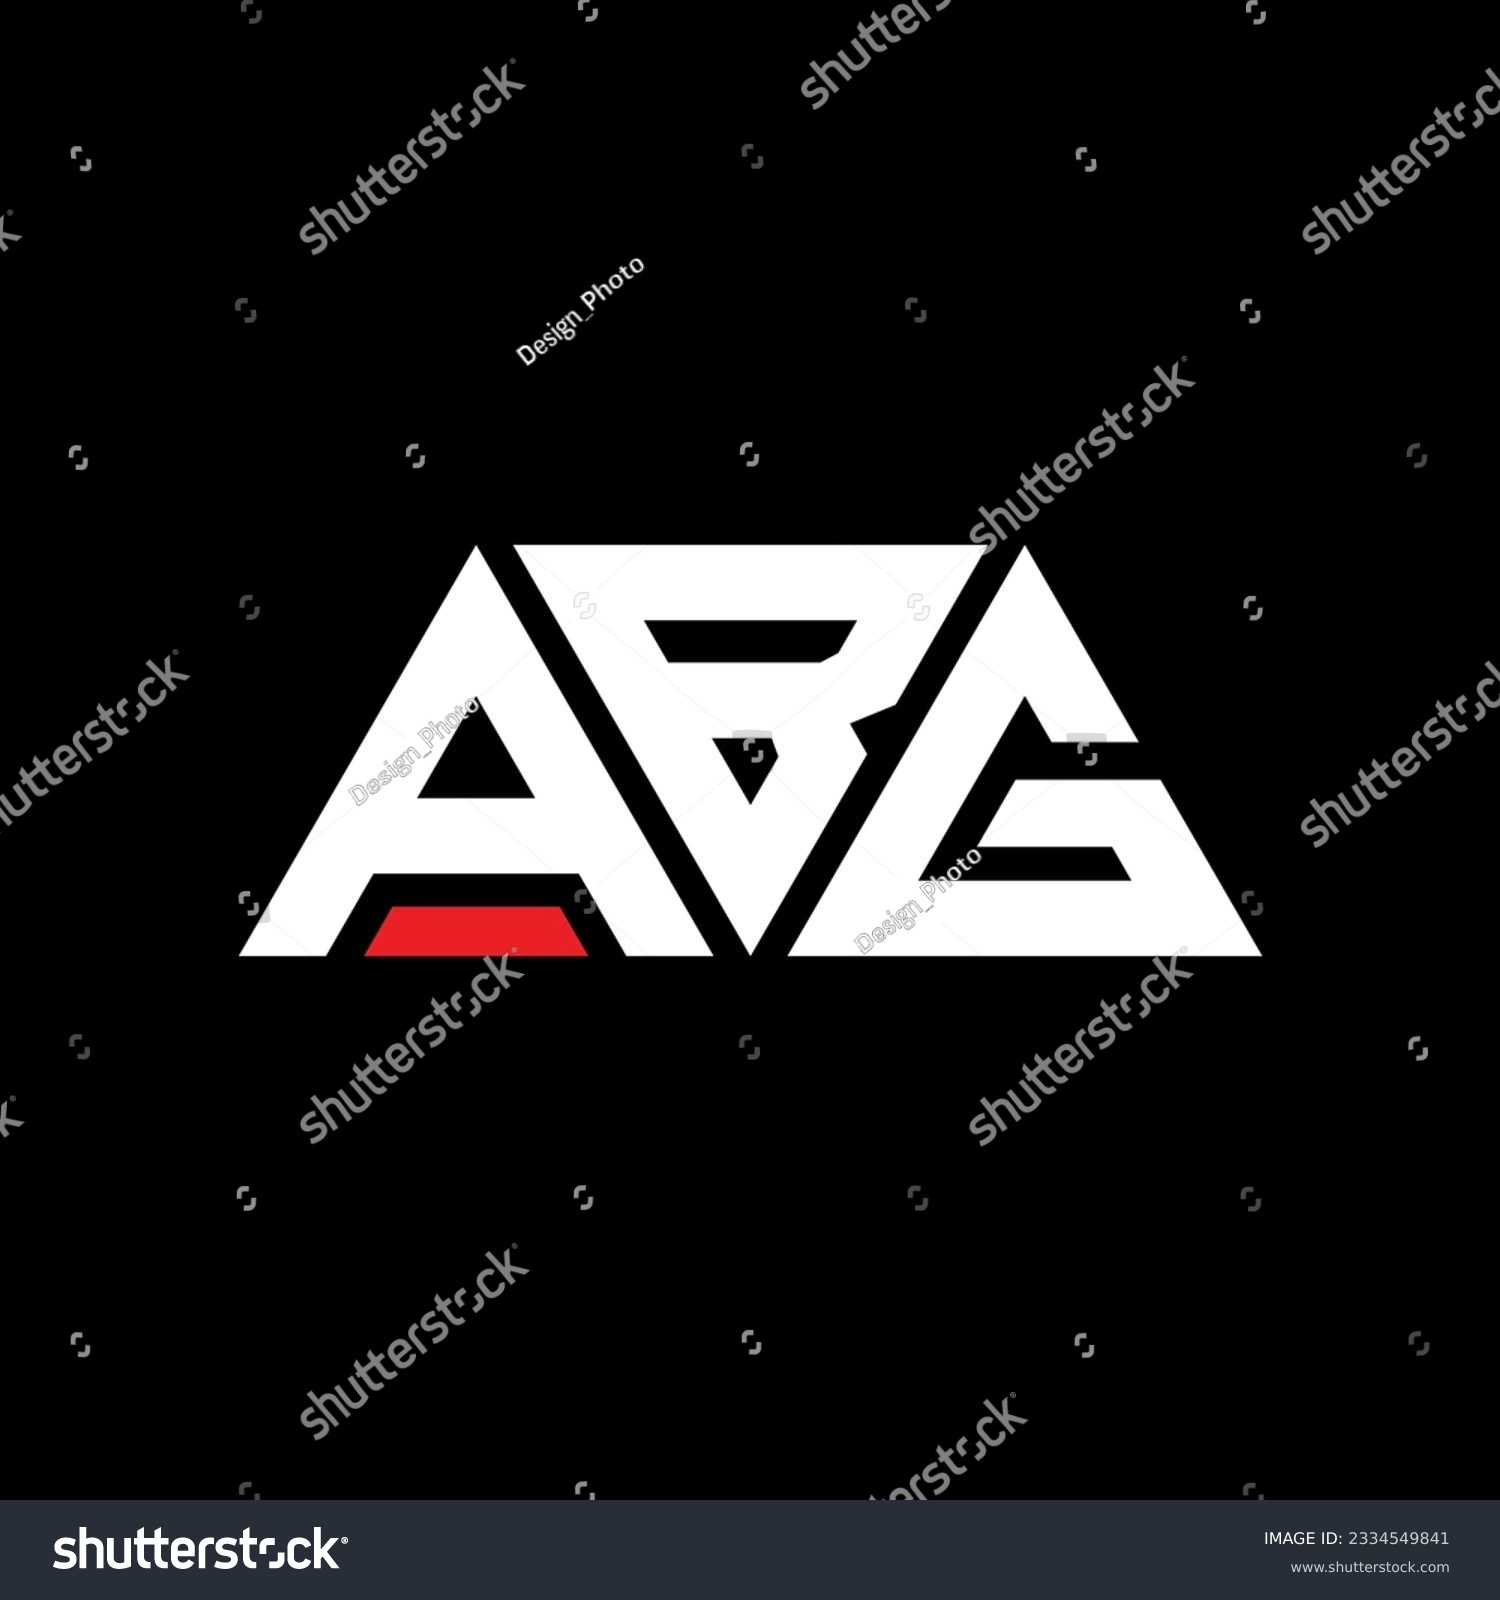 SVG of ABG triangle letter logo design with triangle shape. ABG triangle logo design monogram. ABG triangle vector logo template with red color. ABG triangular logo Simple, Elegant, and Luxurious design. svg